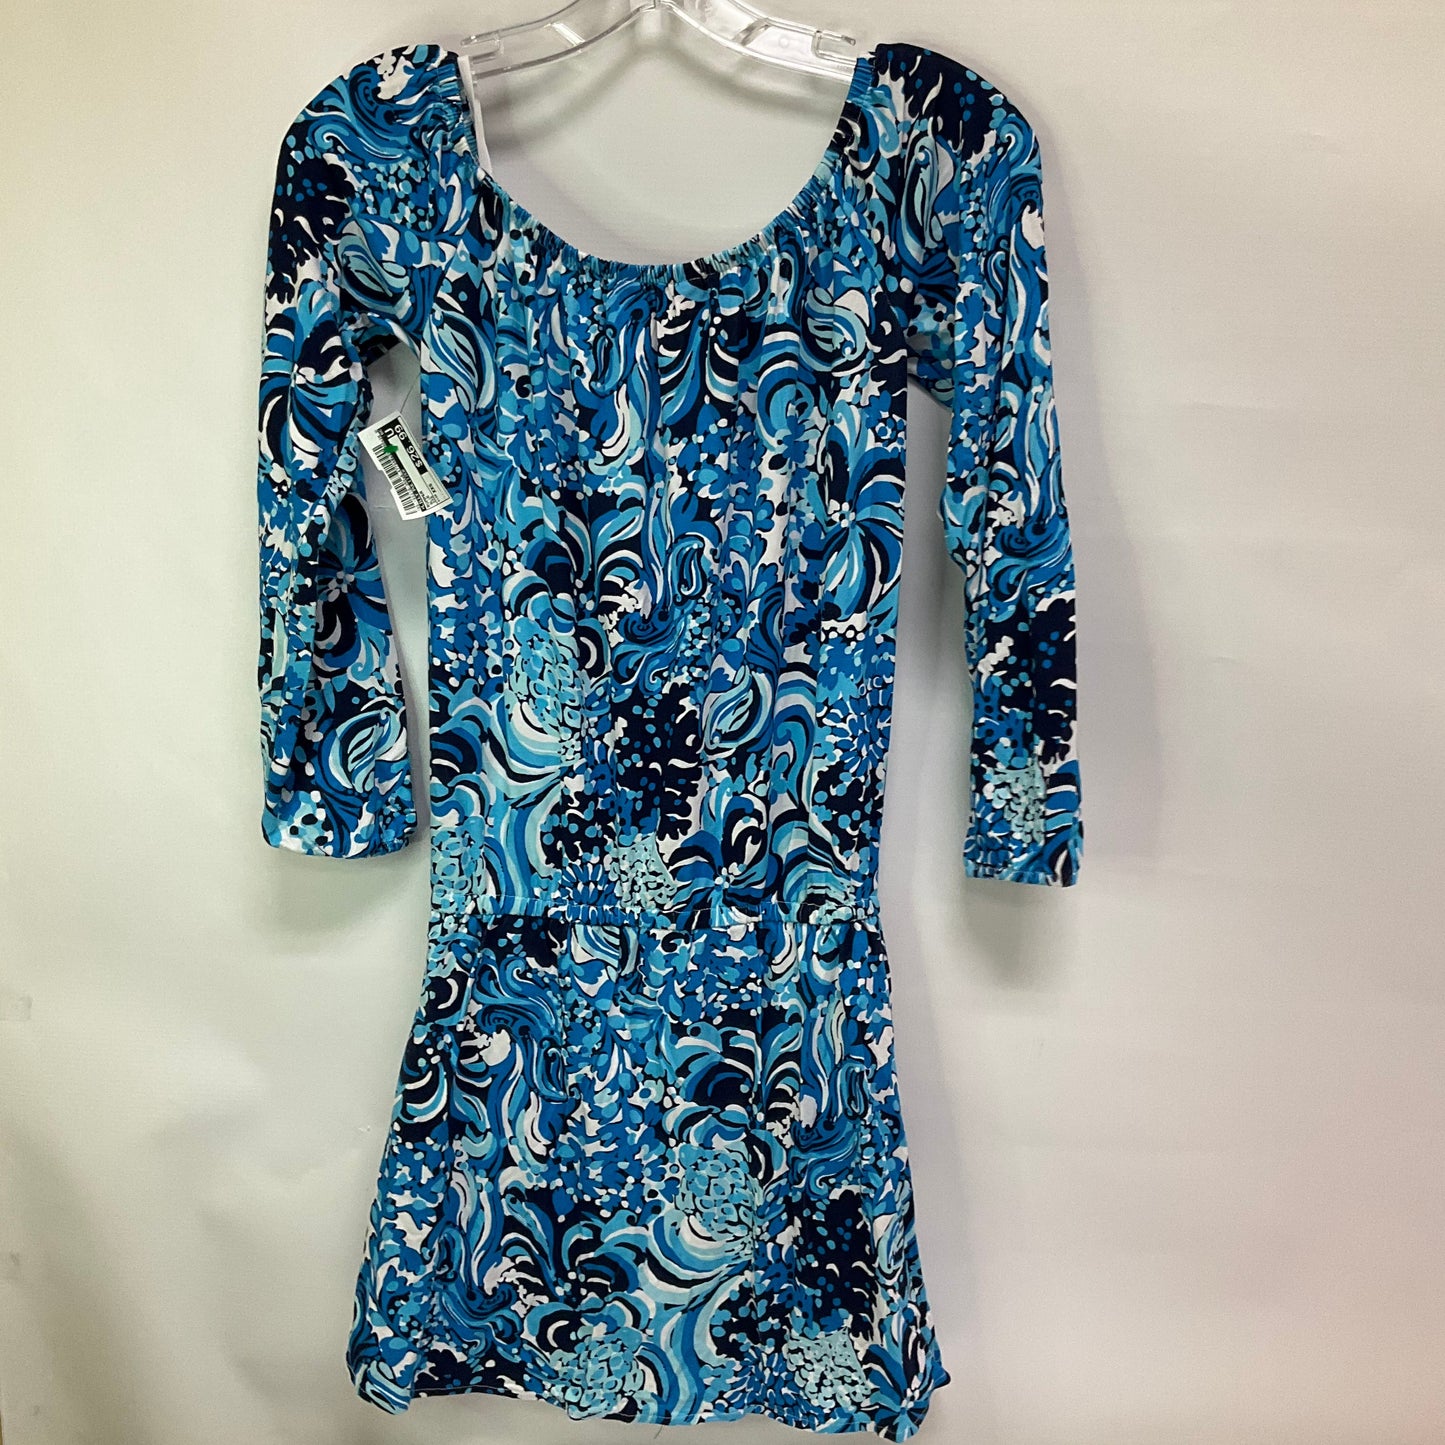 Romper By Lilly Pulitzer  Size: Xxs